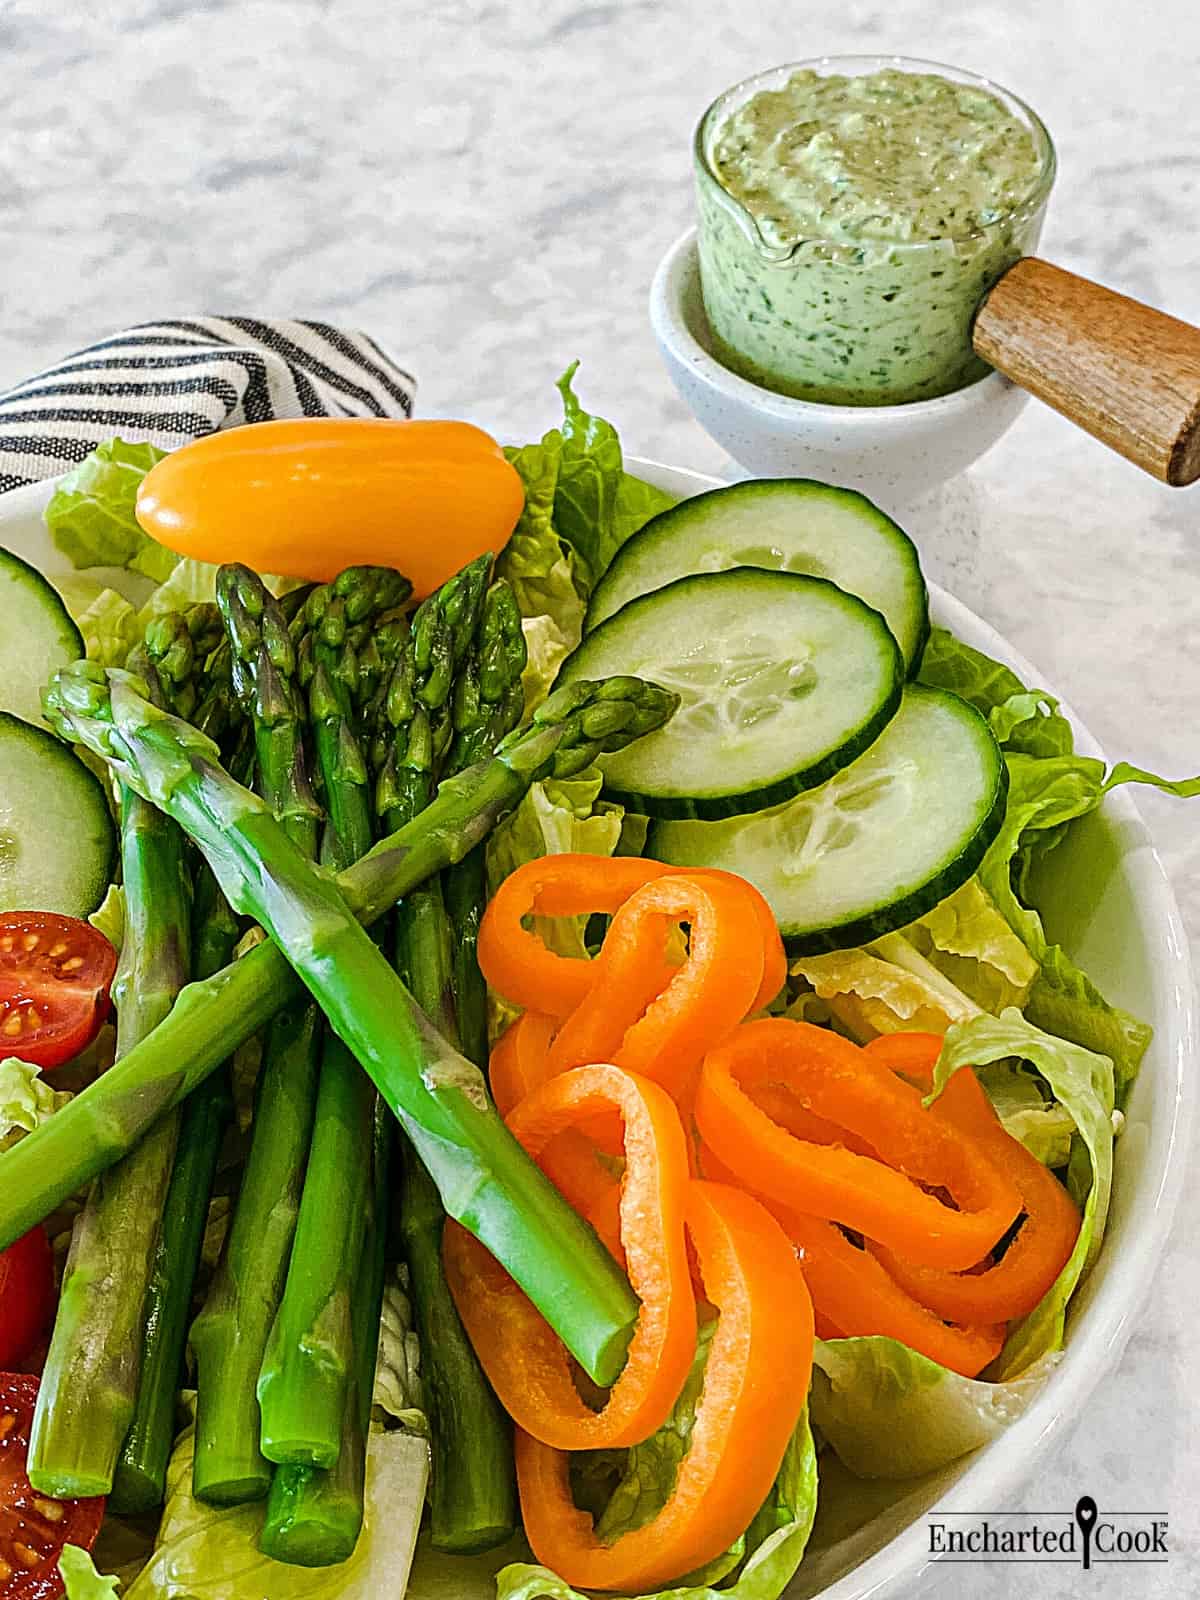 A garden salad of lettuce, cucumber, asparagus, orange peppers, and cherry tomatoes, with green salad dressing in a small pitcher.